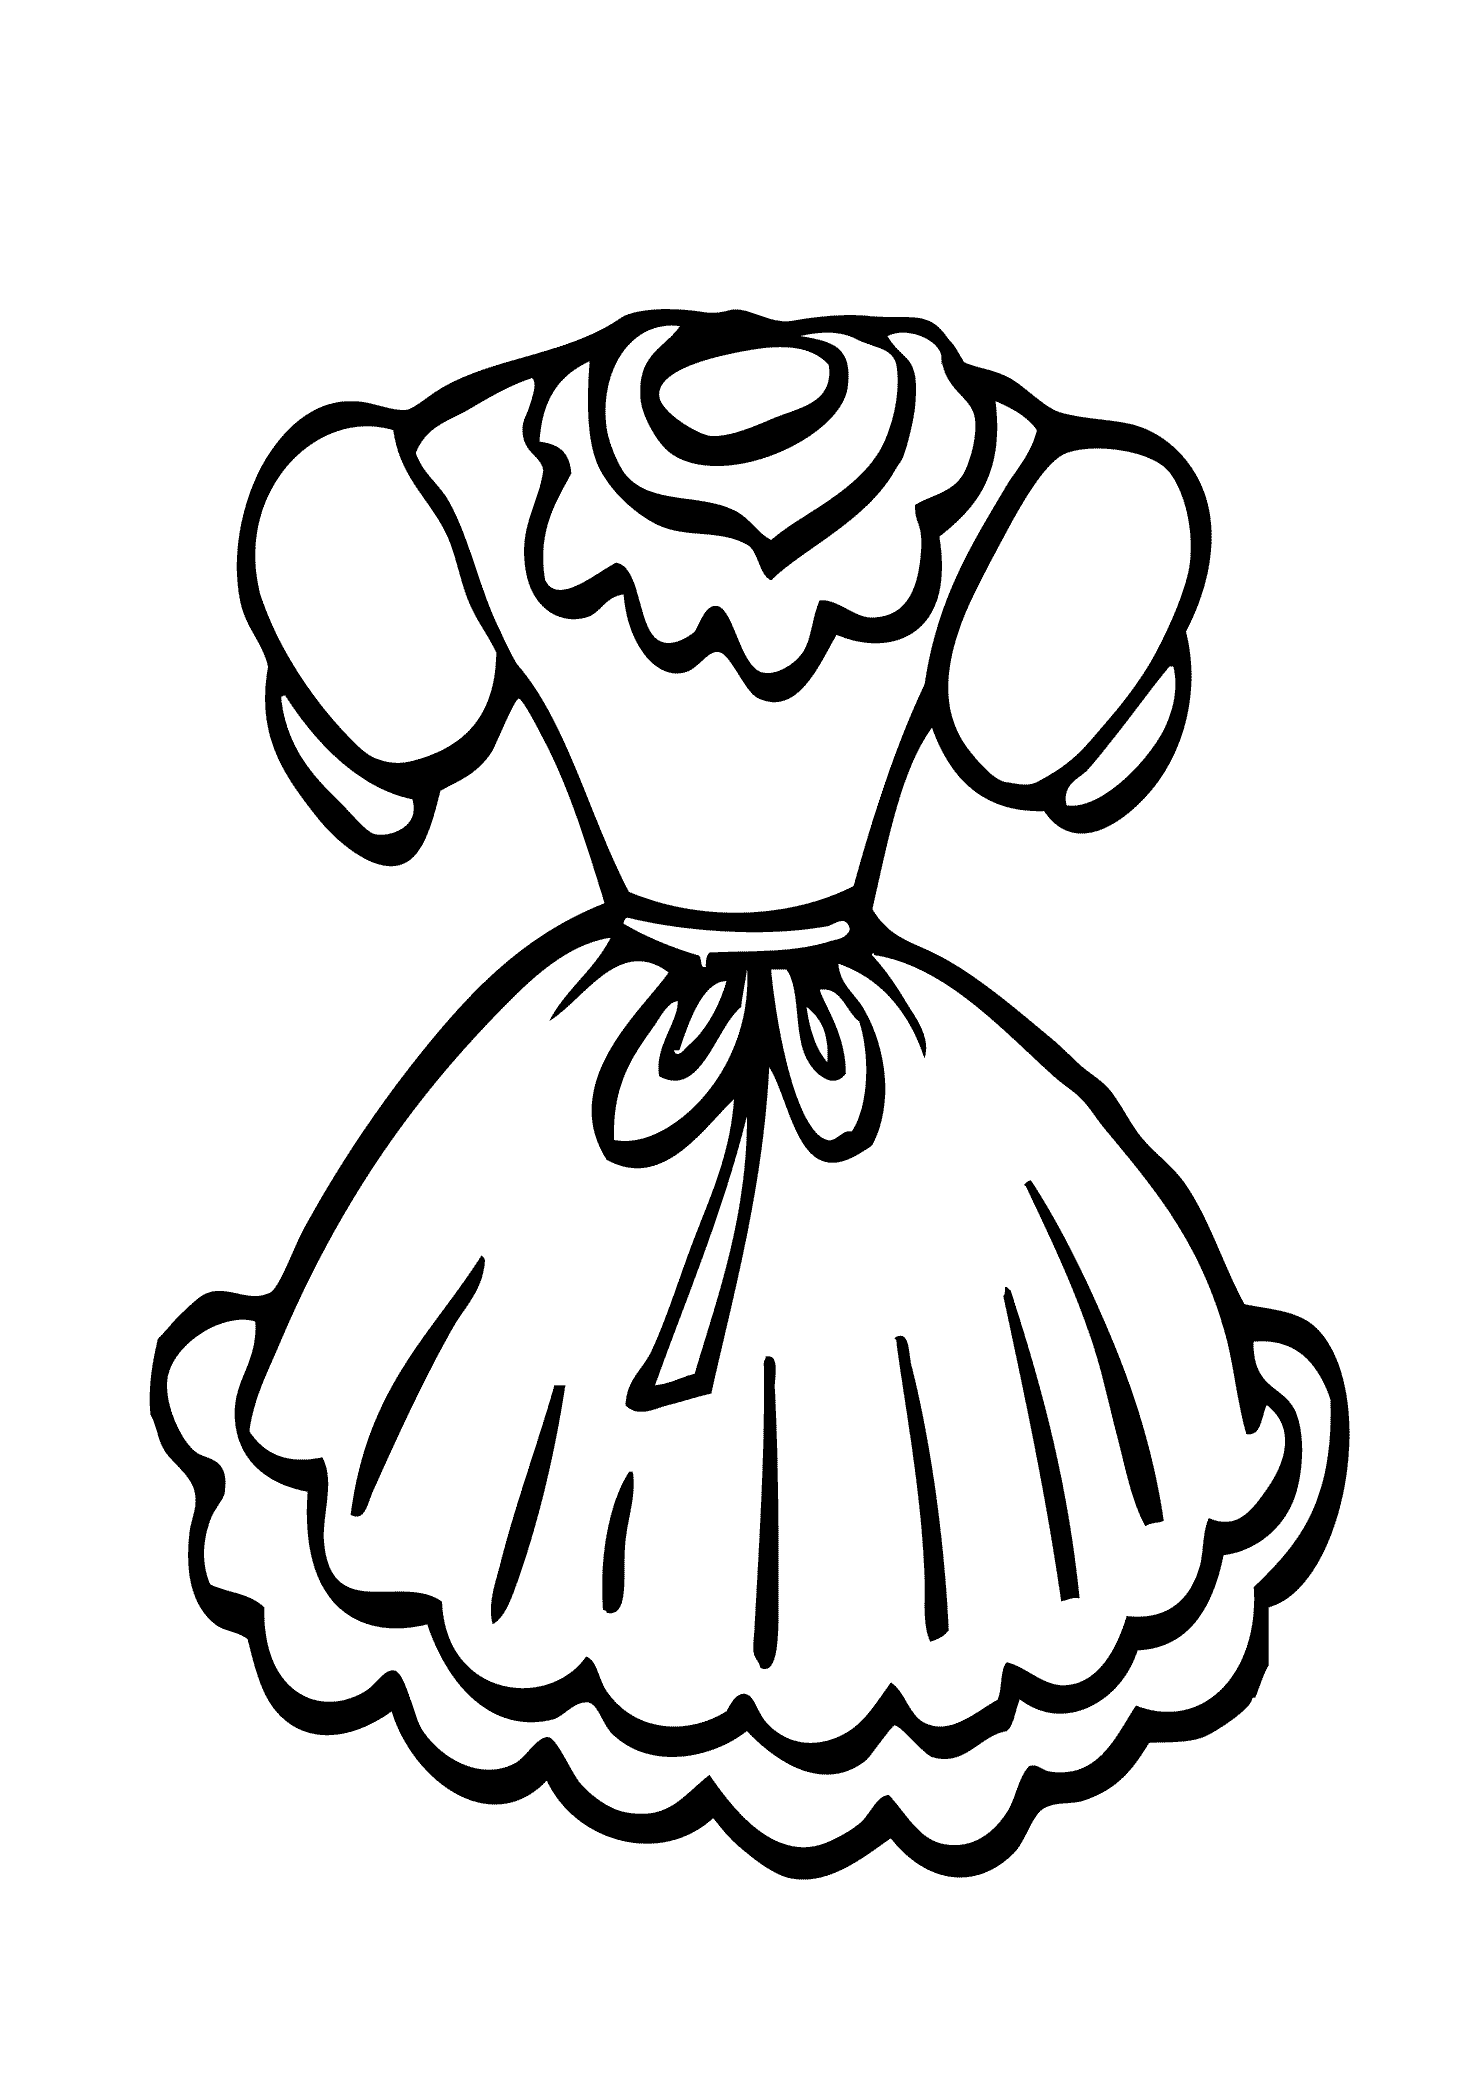 Clothes Coloring Pages For Girls - Coloring Pages For All Ages